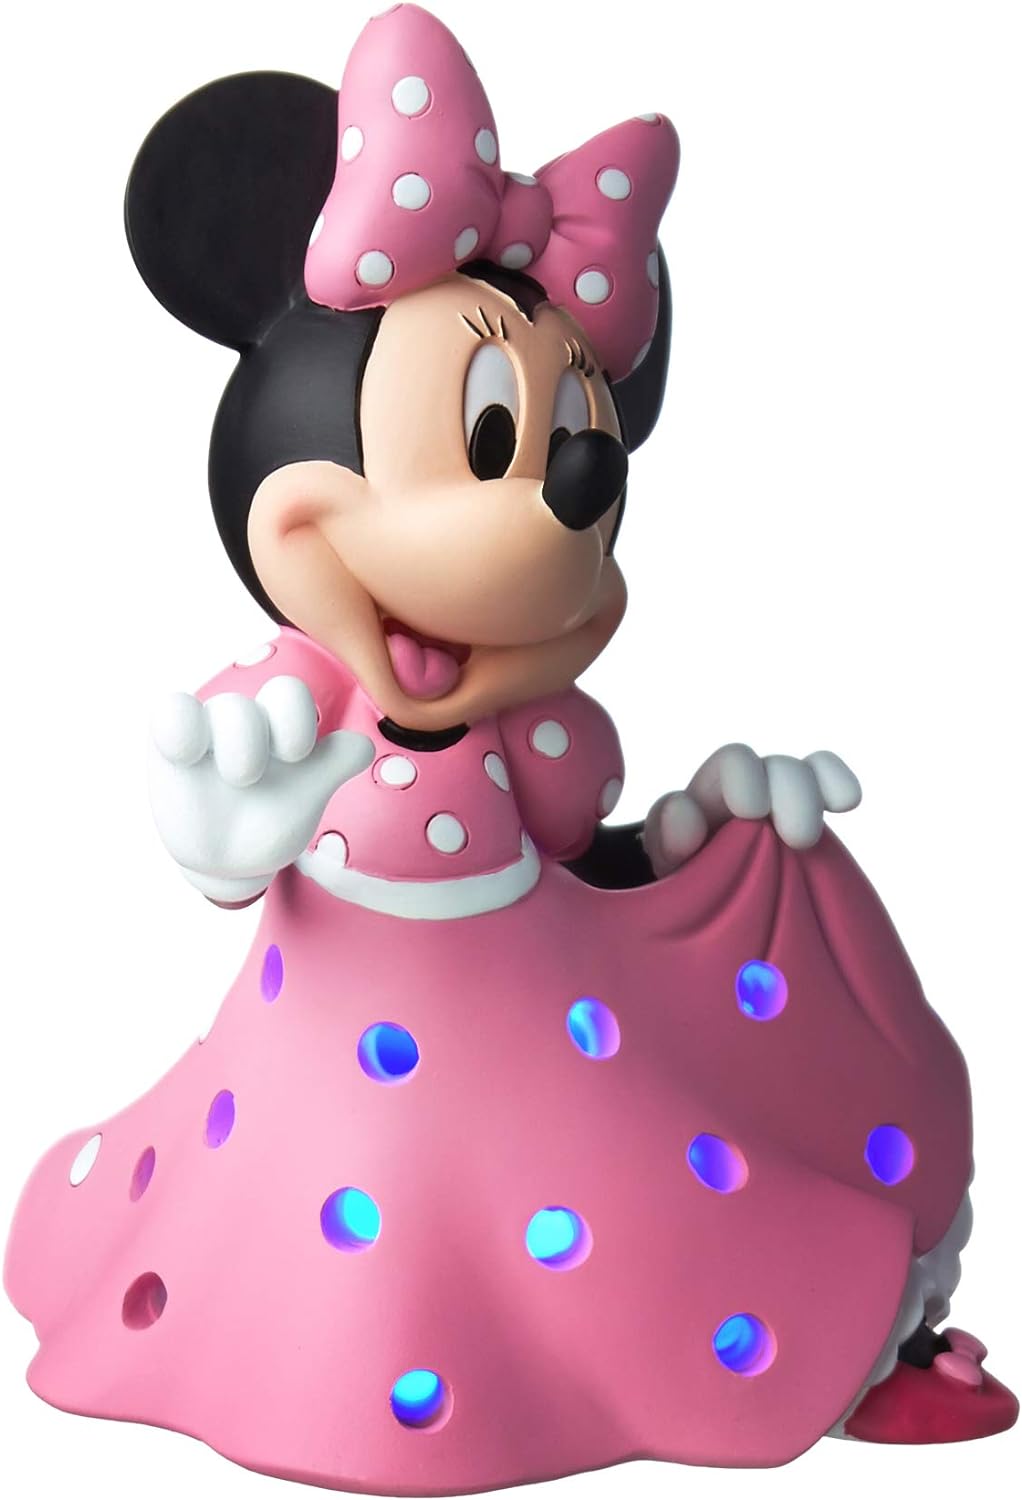 Precious Moments Minnie Mouse Musical Figurine with LED light